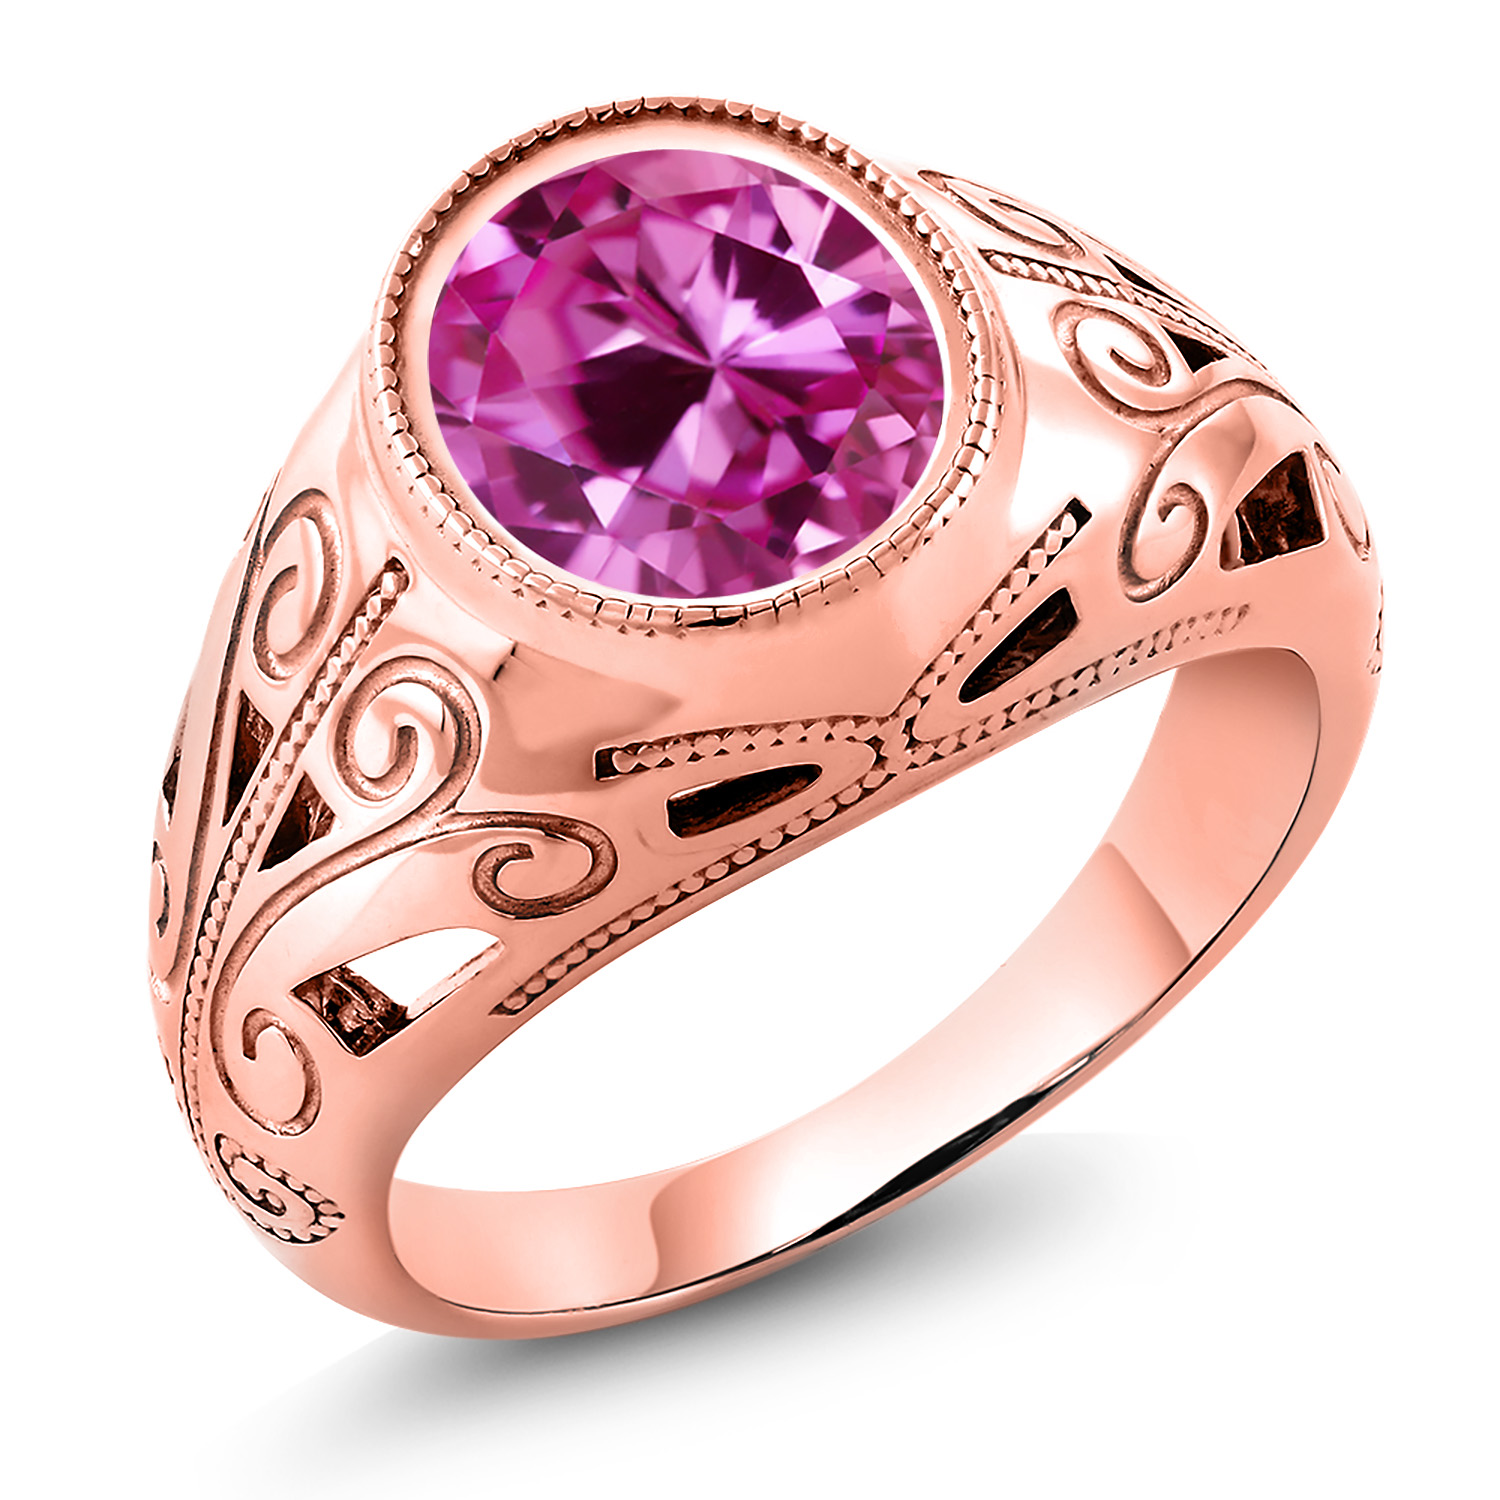 Gem Stone King 7.50 Ct Oval Pink Created Sapphire 18K Rose Gold Plated Silver Men's Ring